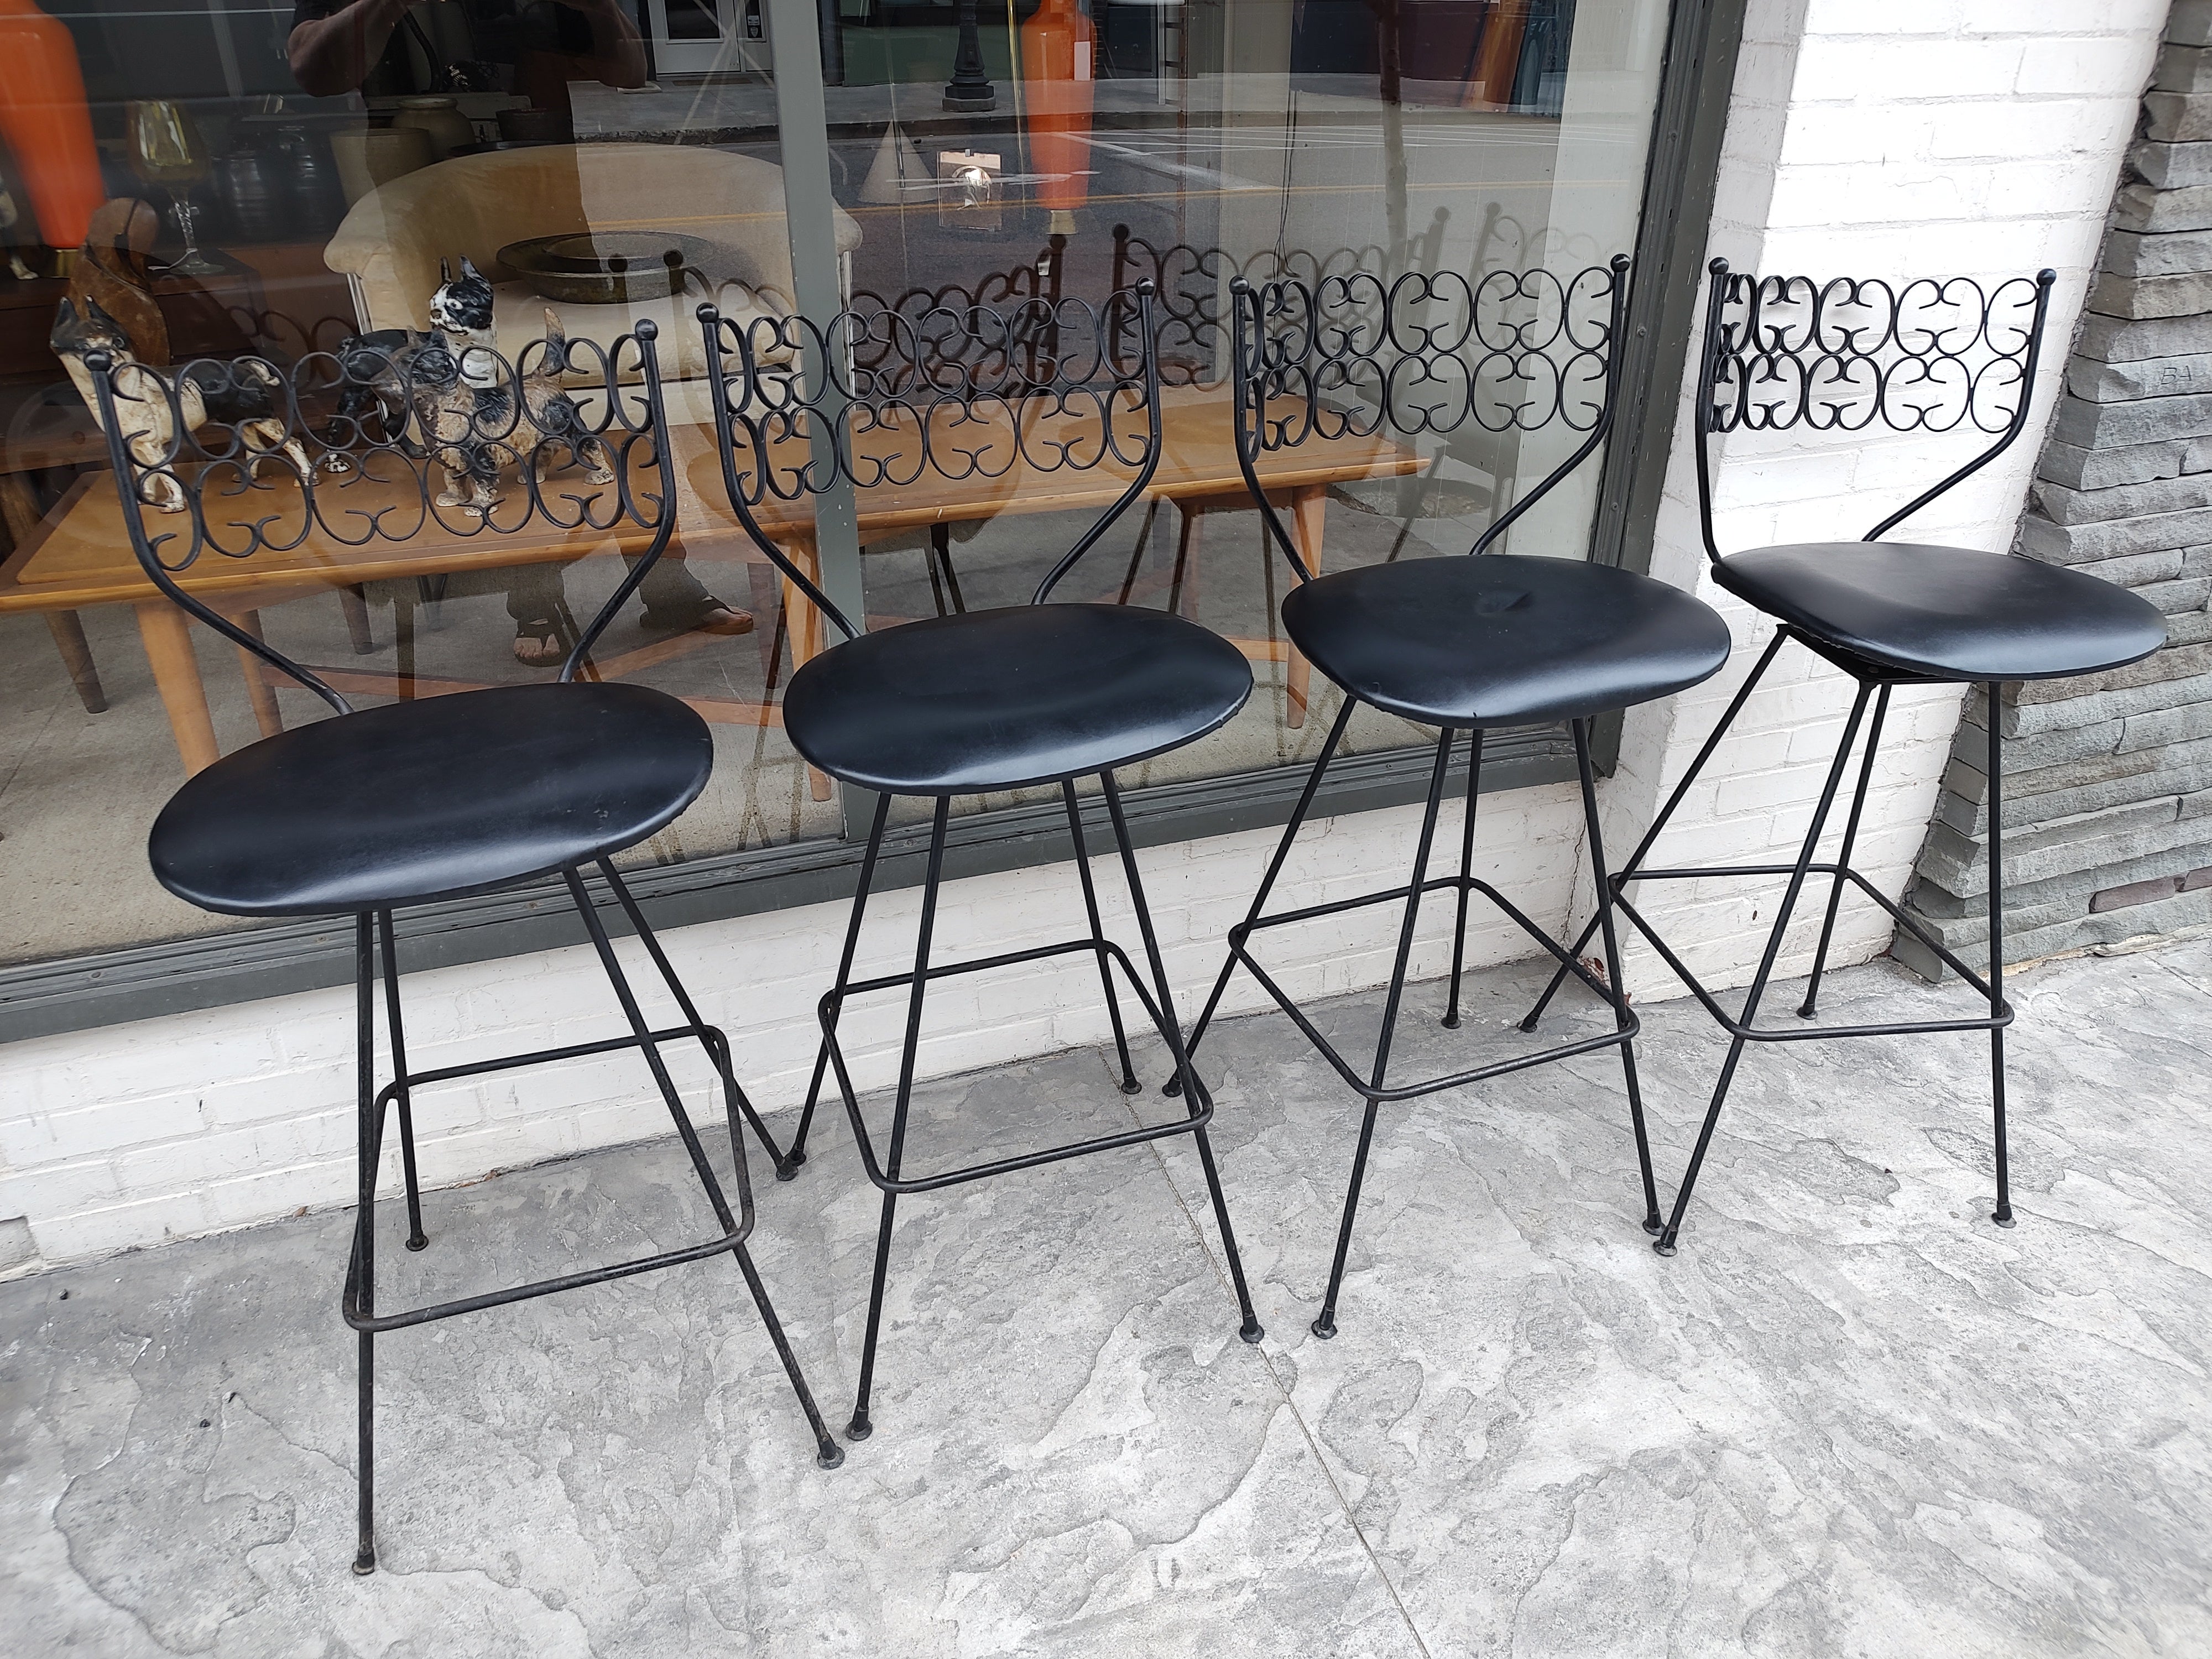 Fabulous set of 4 Granada bar stools in all original finish and condition. Designed by Arthur Umanoff for The Scott Boyeur Collection in the early 1960s. In excellent vintage condition with minimal wear. I have at least 4 other bar stools by